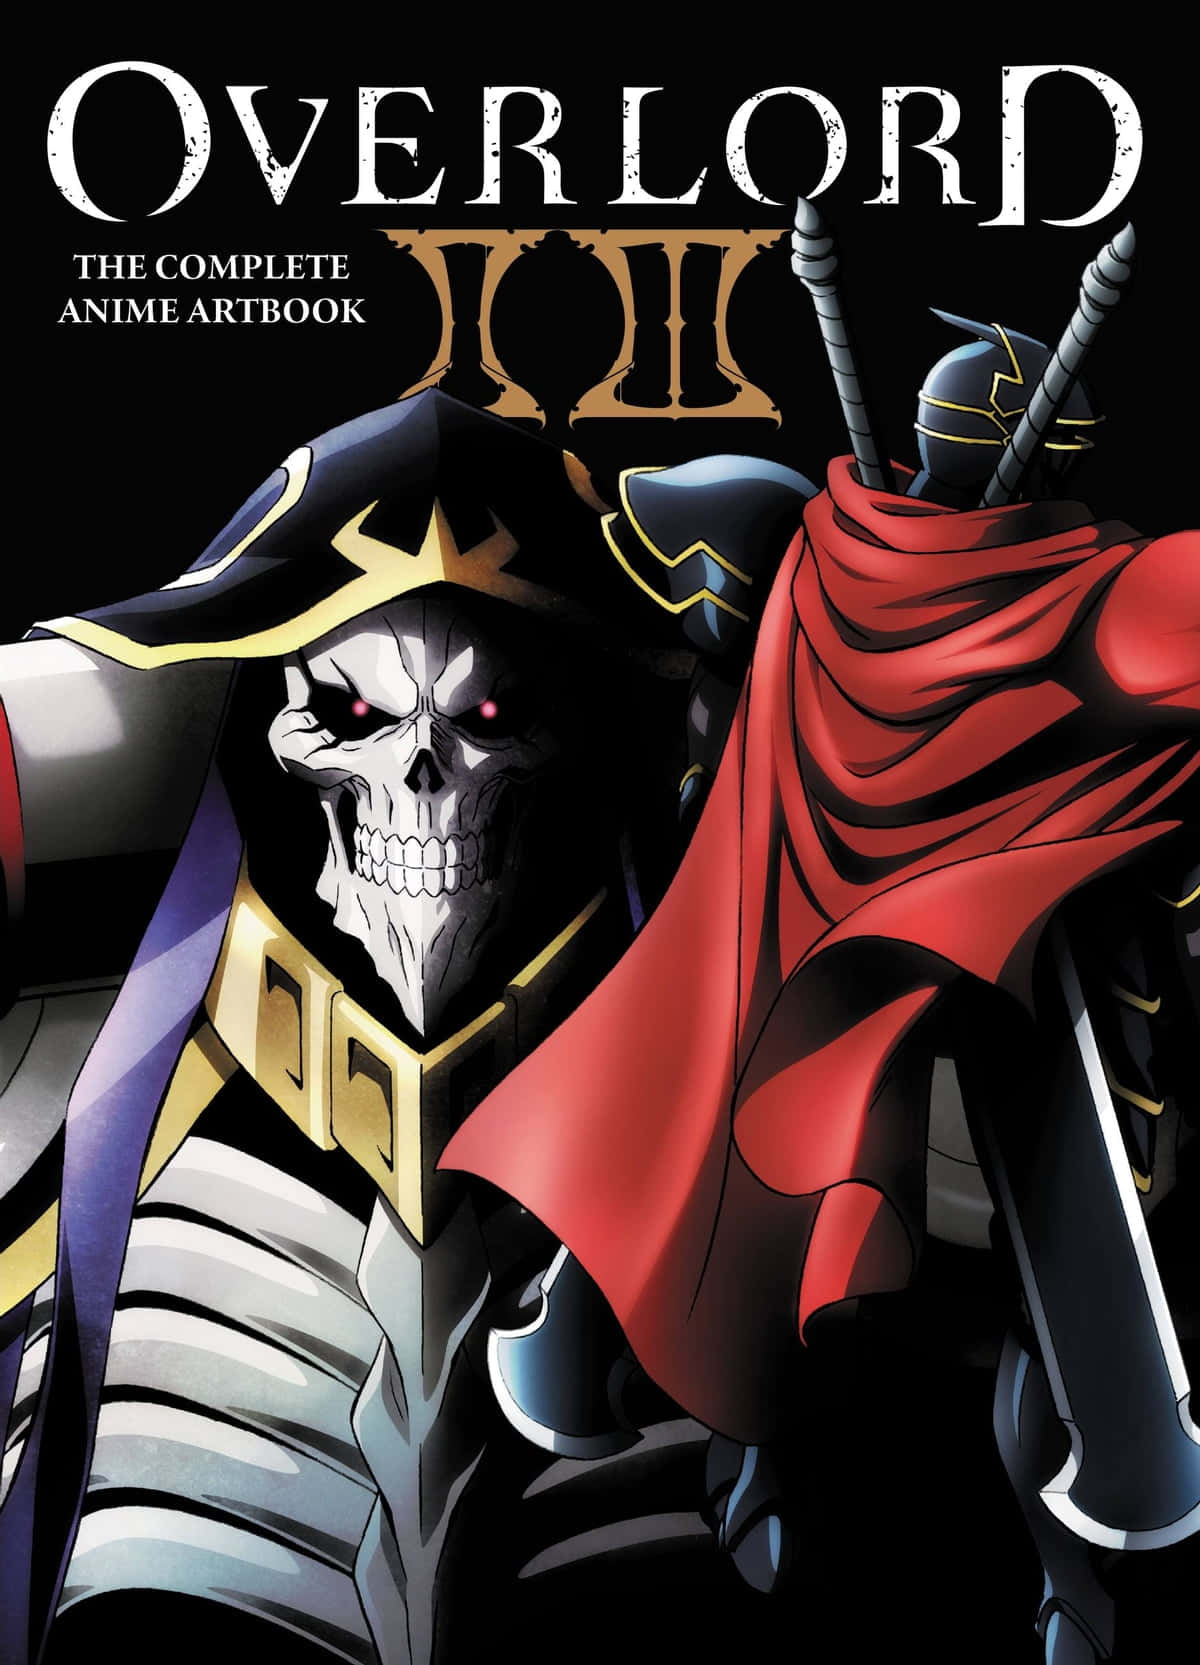 Overlord Anime Artbook Cover Picture